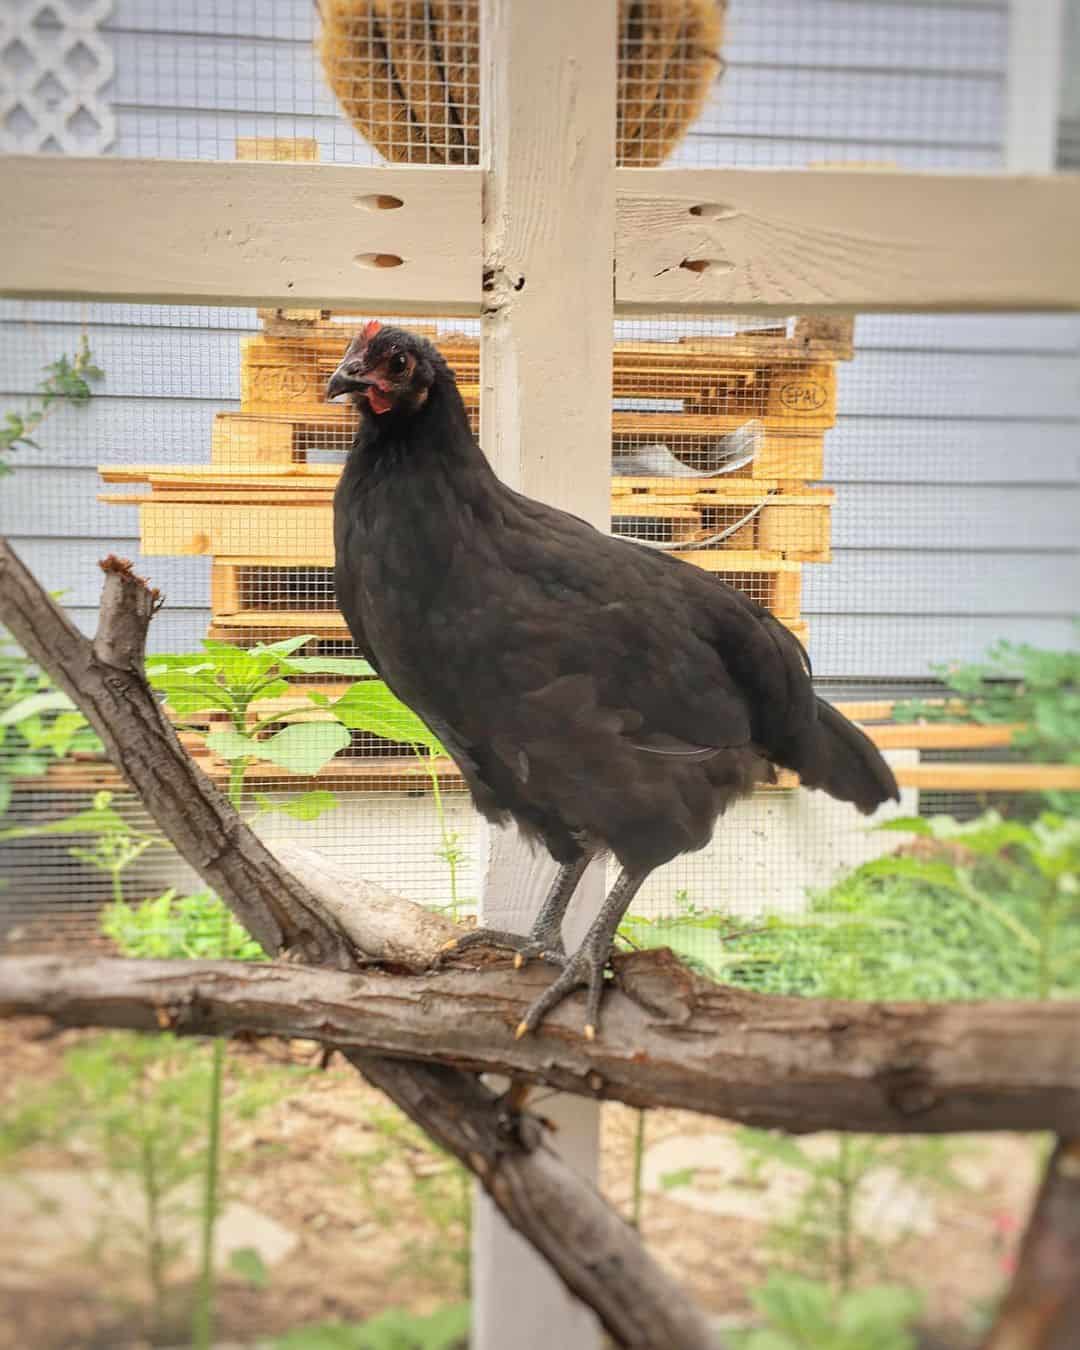 History and genetics of the Black Star chicken